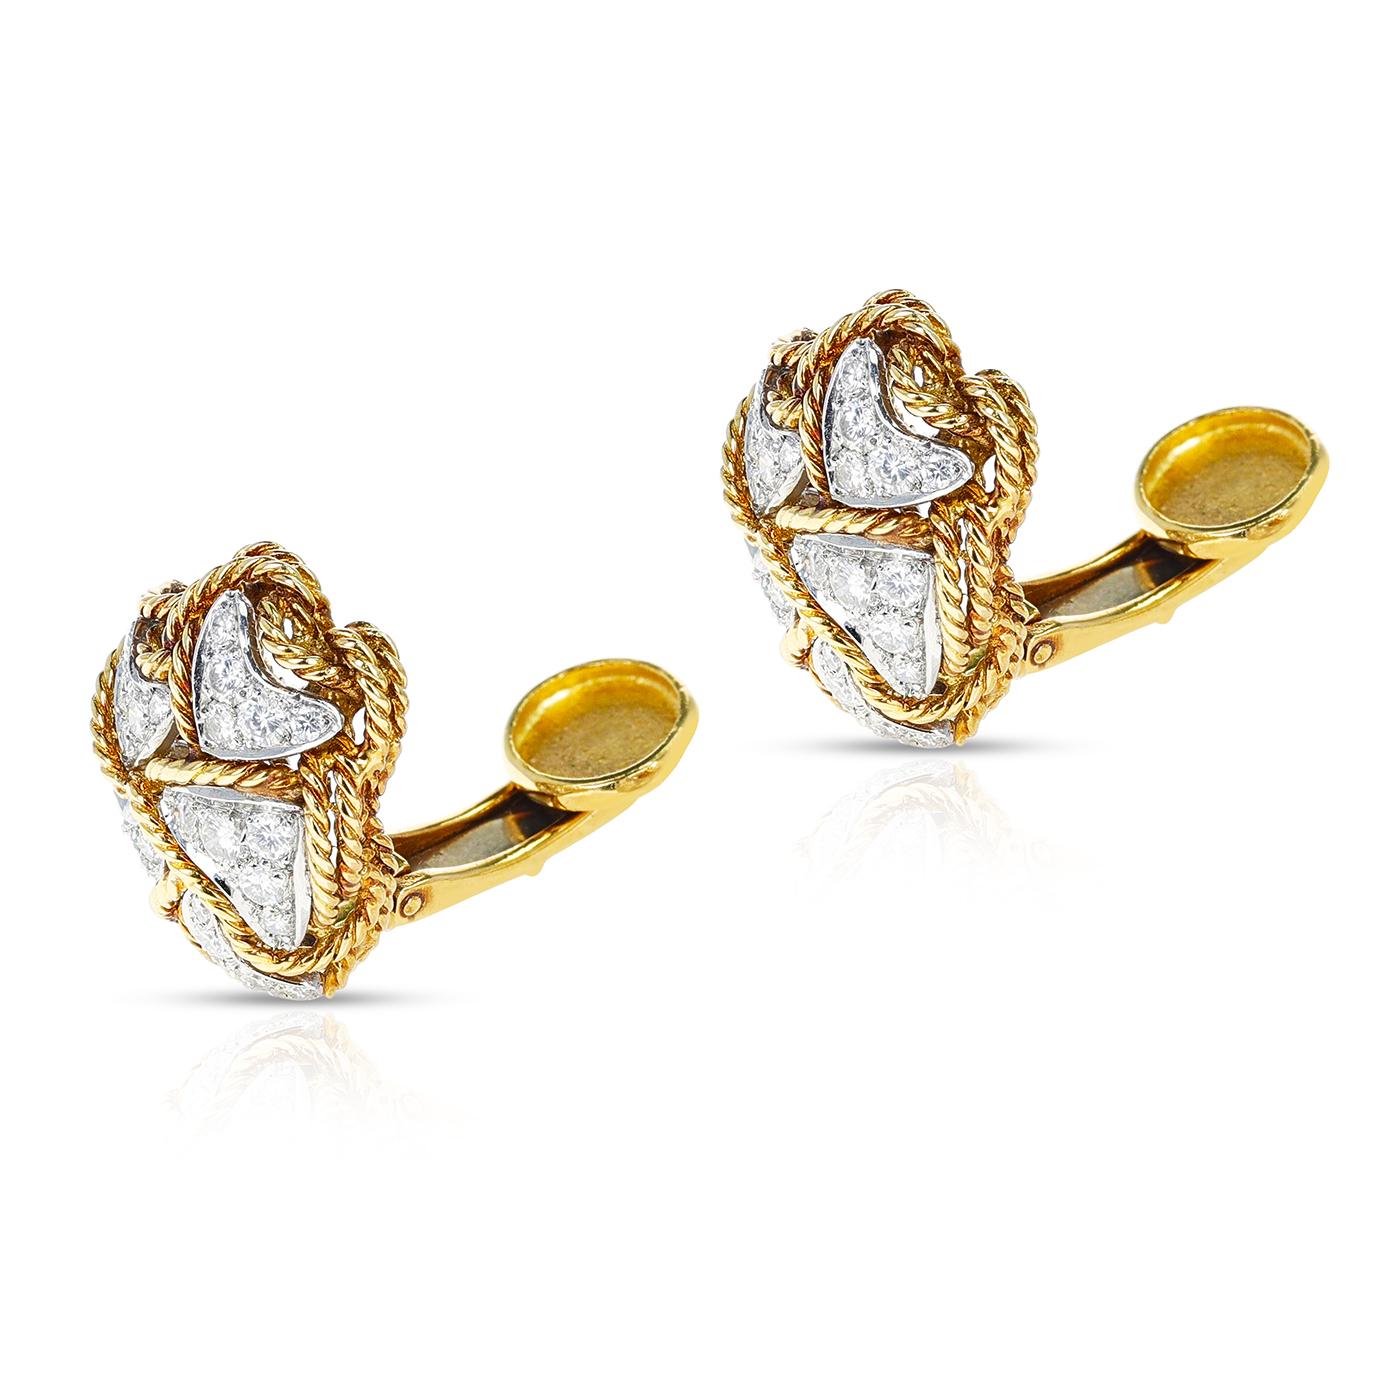 Round Cut 1960's Cartier 3.25 Carats Diamond Cocktail Earrings in 18K Yellow Gold For Sale